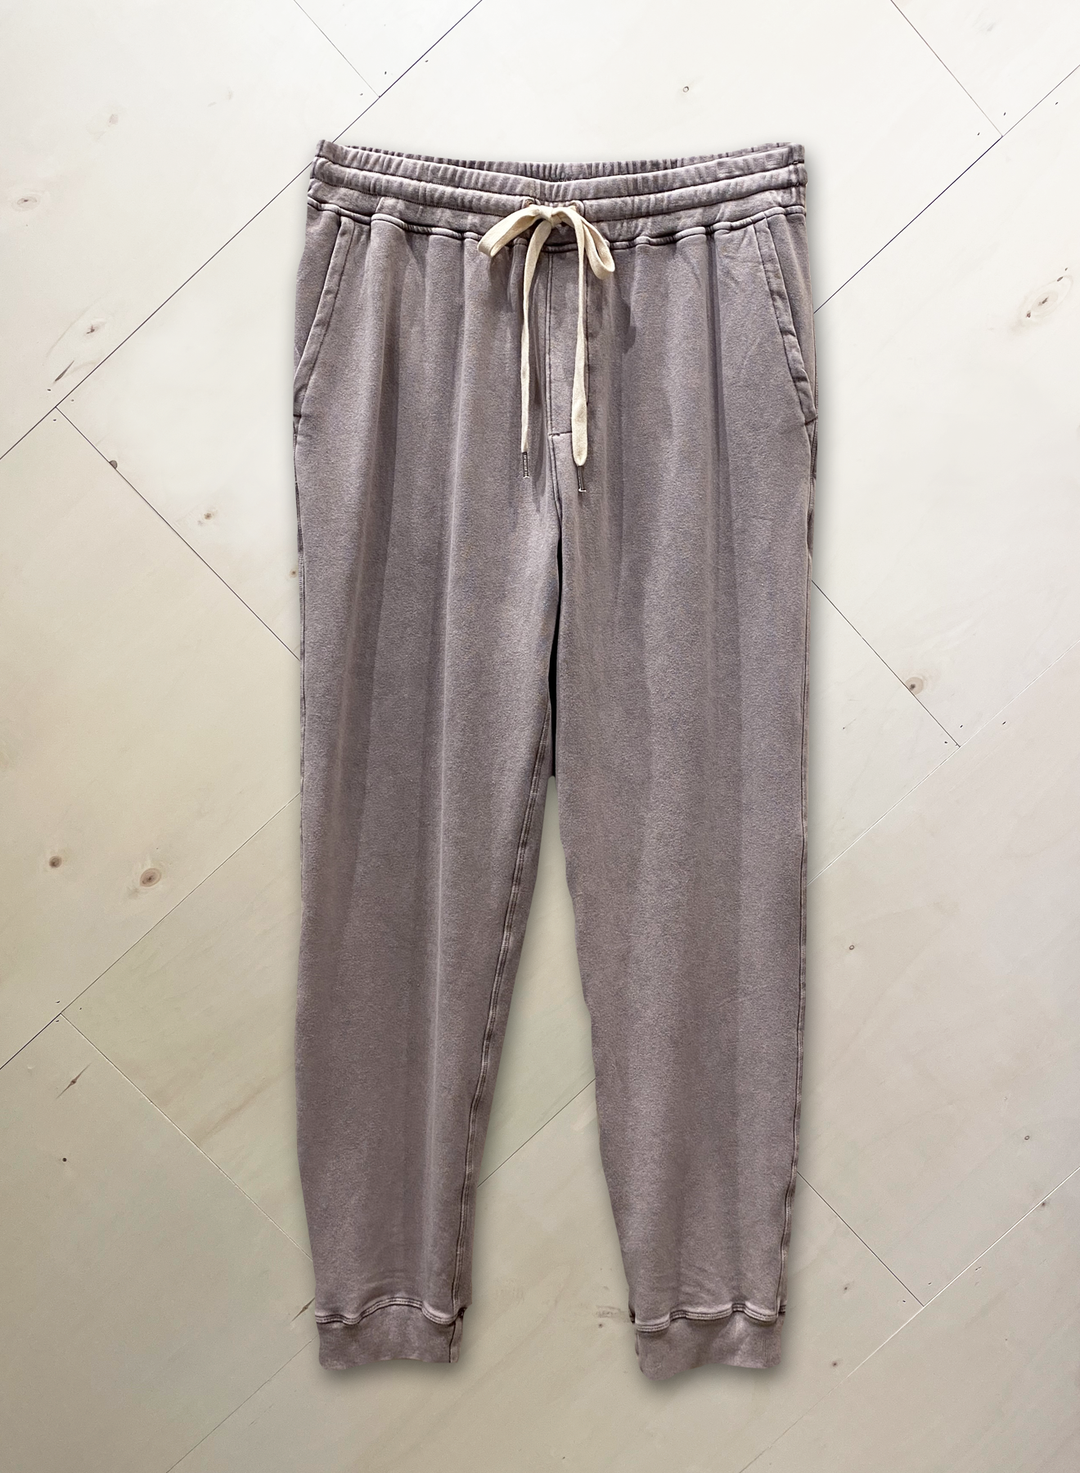 SWEATPANT-HEATHER CHROME - Kingfisher Road - Online Boutique